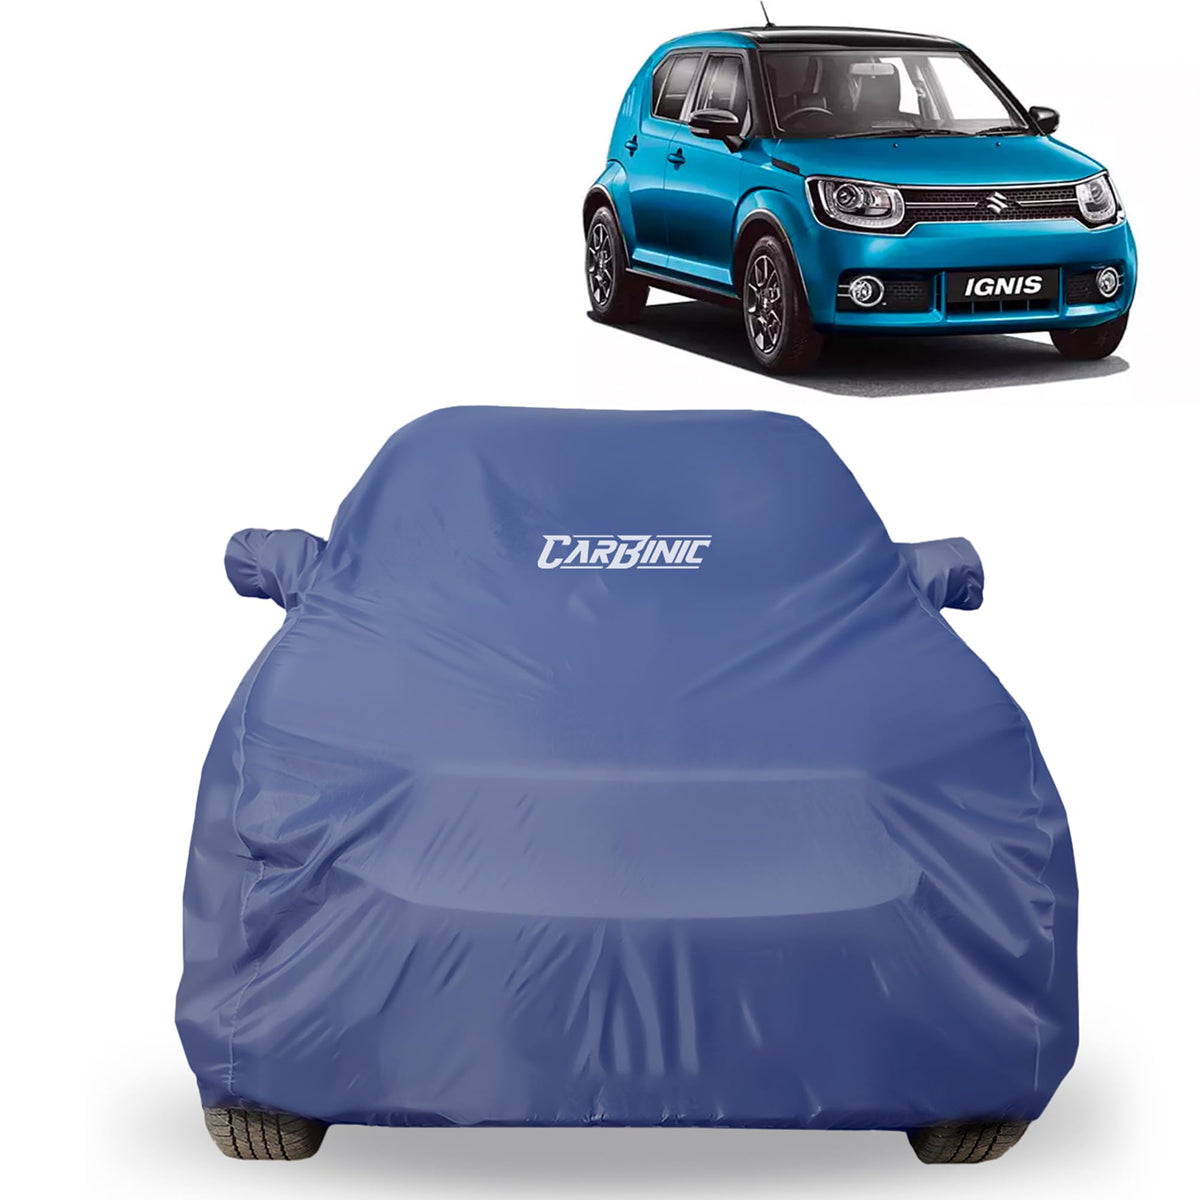 CARBINIC Car Body Cover for Toyota Urban Crusier 2022 | Water Resistant, UV Protection Car Cover | Scratchproof Body Shield | All-Weather Cover | Mirror Pocket & Antenna | Car Accessories Dusk Blue